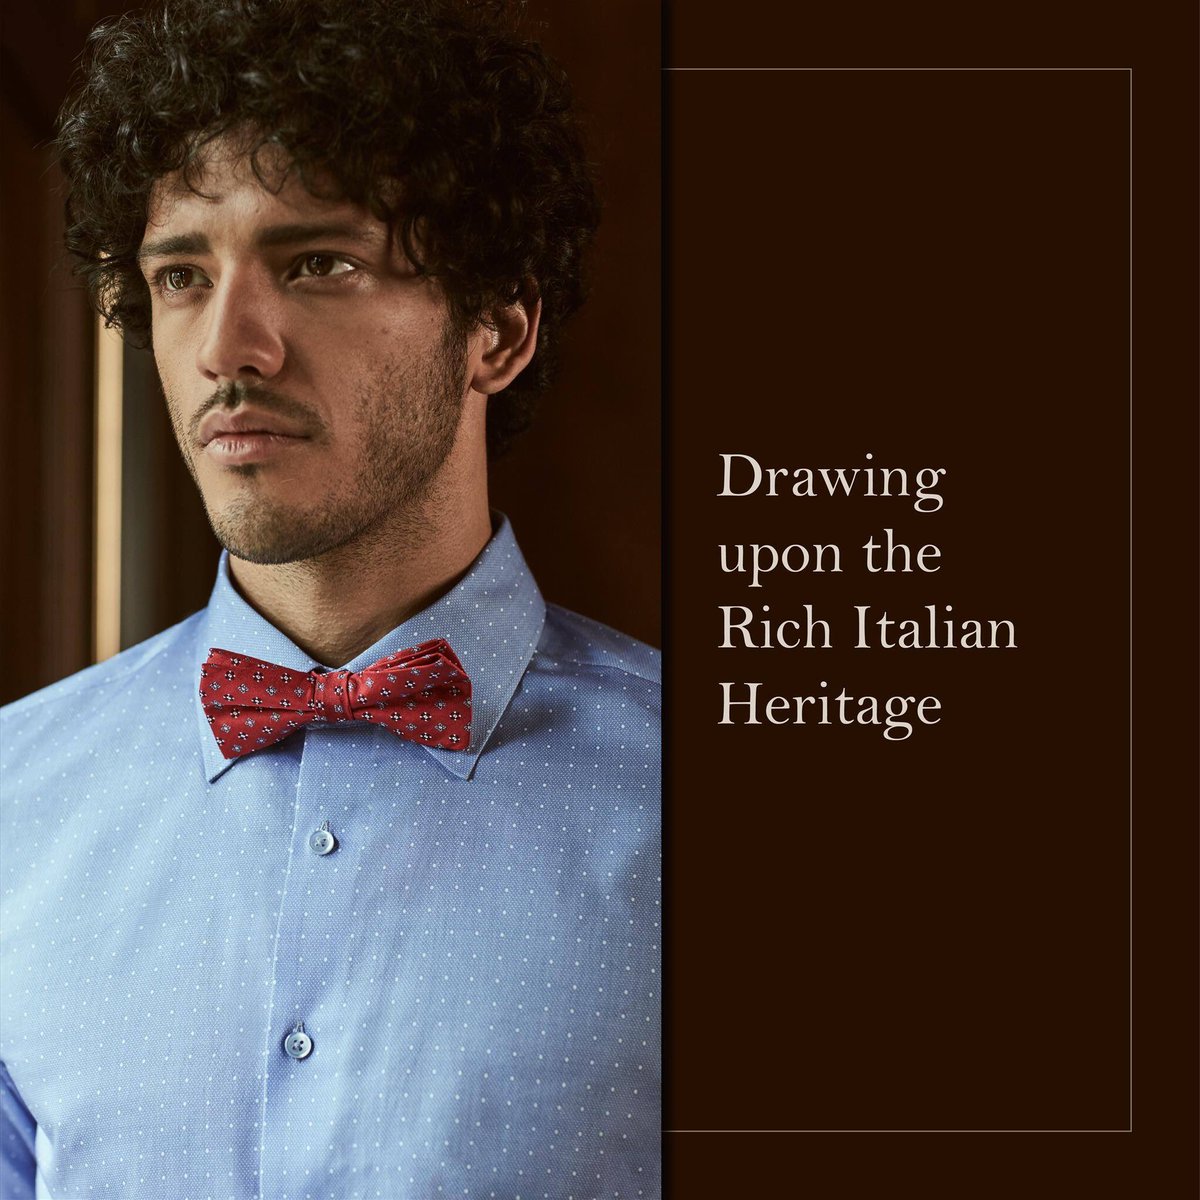 A cultured man reflects a sense of being like no one before. And well crafted clothing, reflects upon you. So this season, draw upon the rich Italian heritage, right from the age of Renaissance. Along with aesthetics so brilliant and modern Indian man. Revel in artisanal culture. https://t.co/KyAWsT4PYF